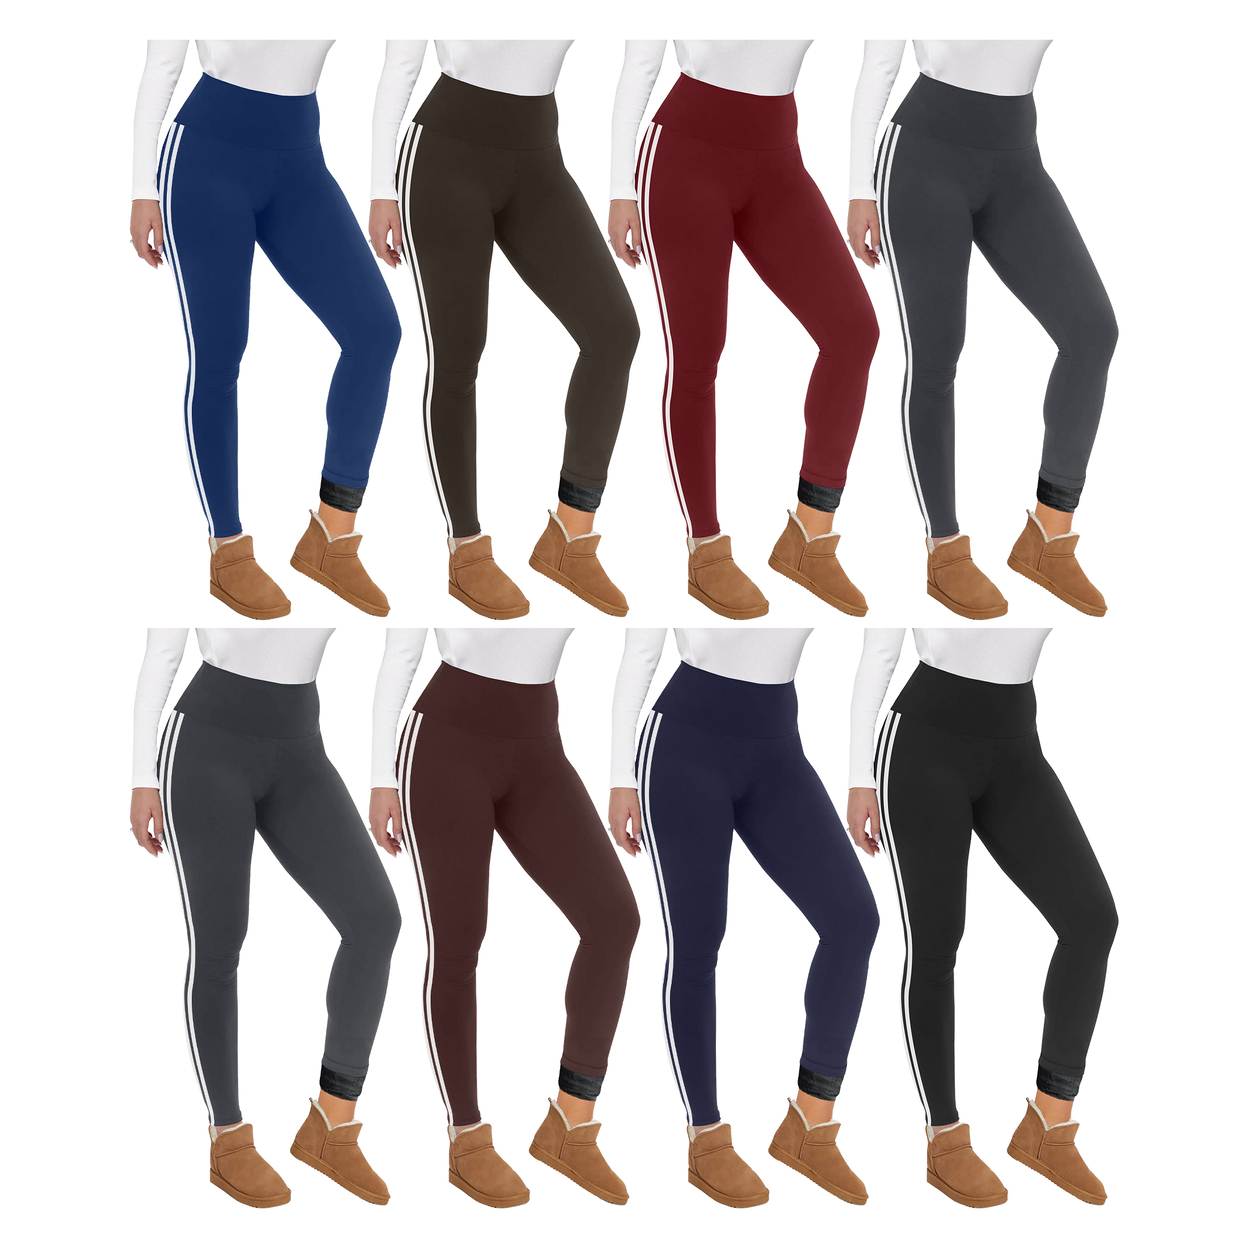 4-Pack: Women's Ultra Soft Winter Warm Cozy Striped Fur Lined Yoga Leggings - Assorted, Xx-large